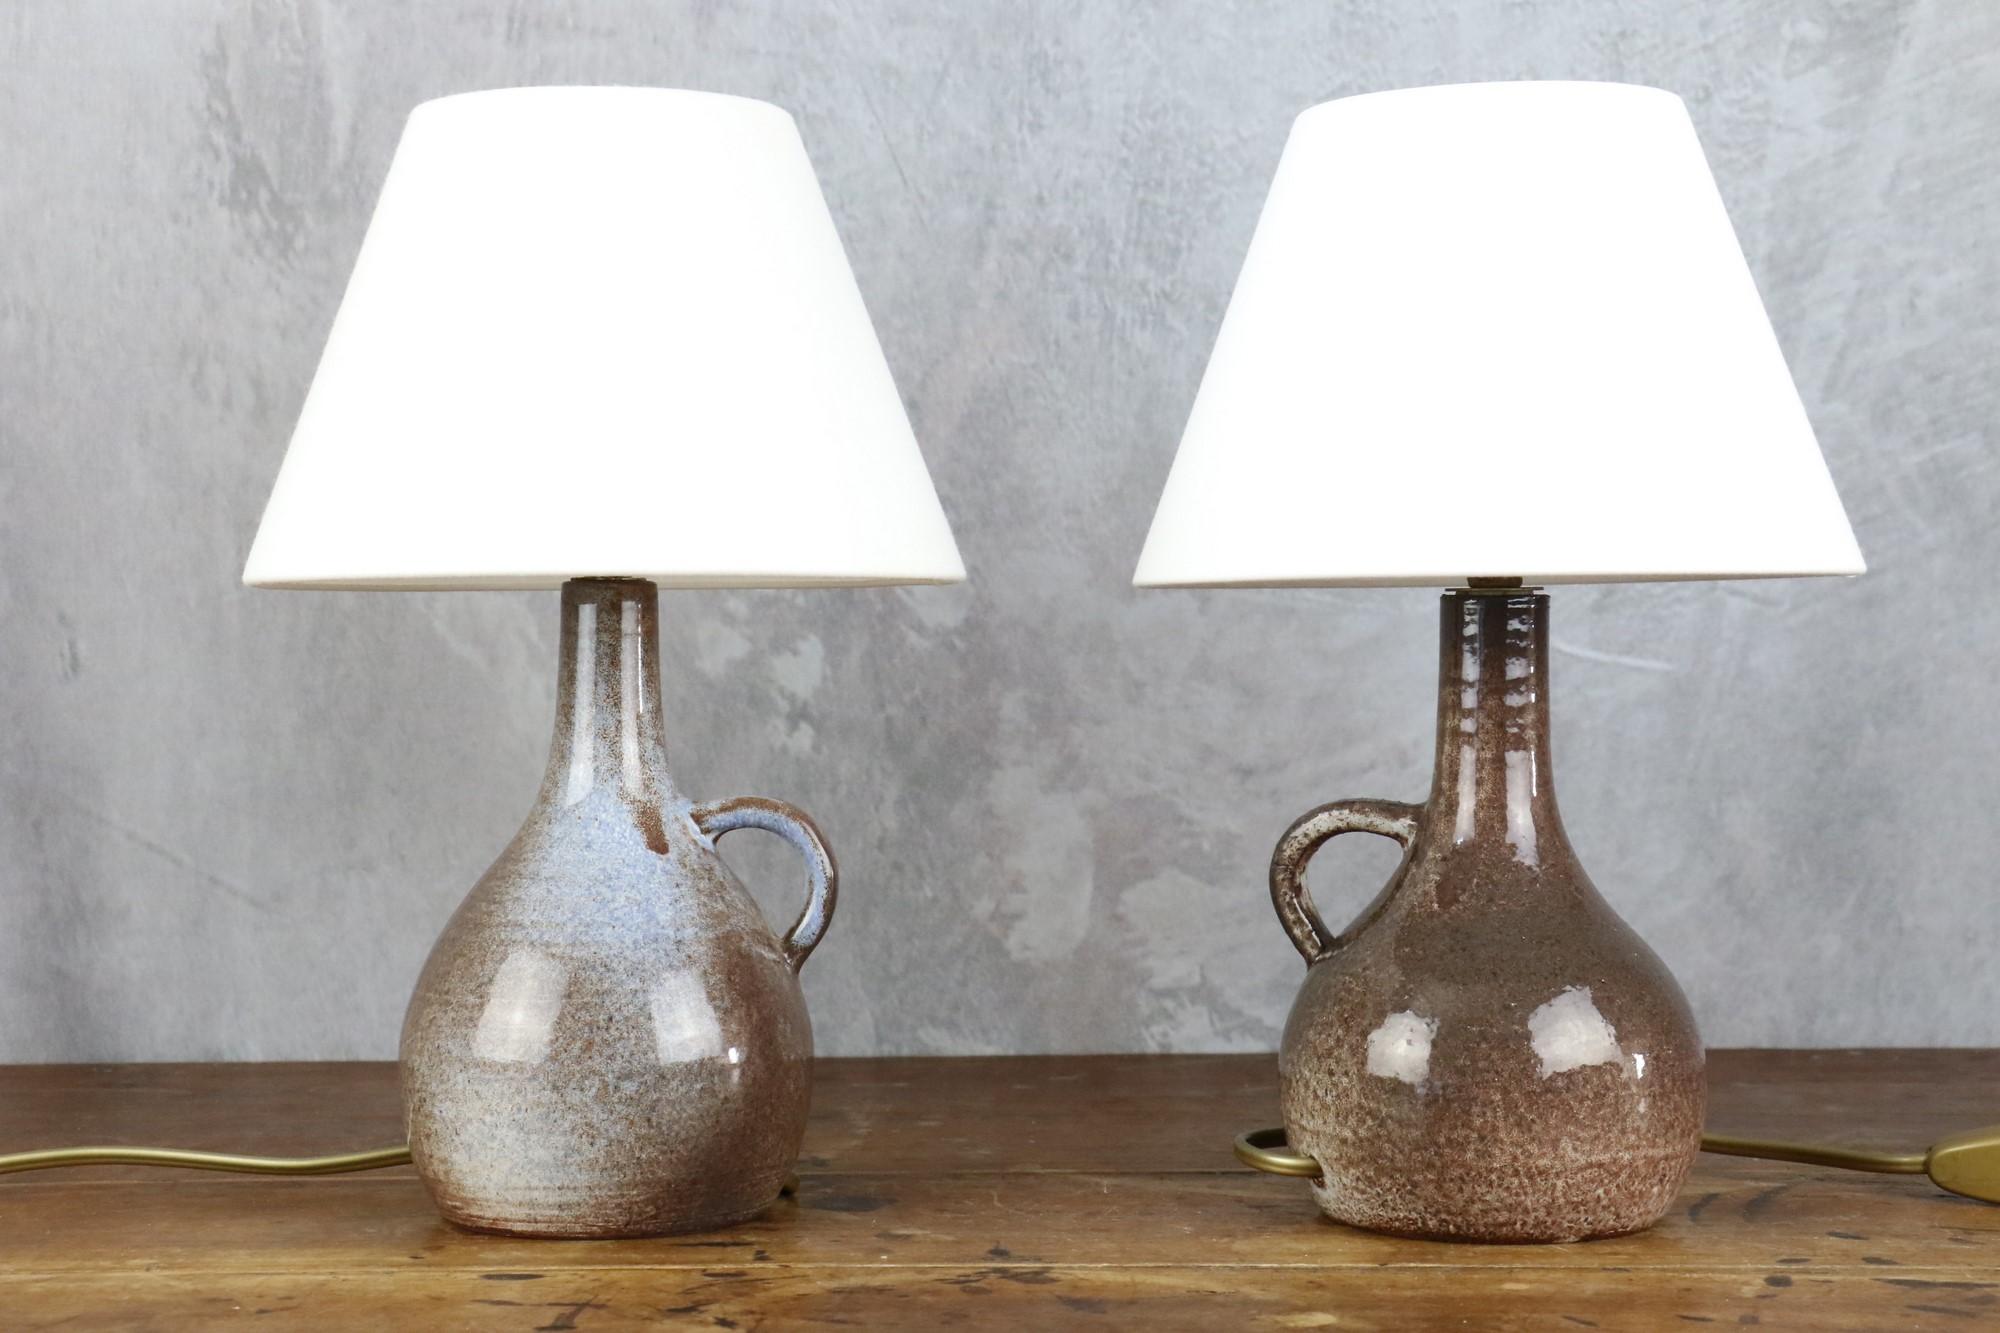 Pair of Mid-century ceramic lamps by Robert Chiazzo, 1960s

Lovely pair of ceramic lamps by Robert Chiazzo, a ceramist from Vallauris' golden age in the 50s and 60s. These two lamps work as a duo, as they are delicately glazed in brown, one also